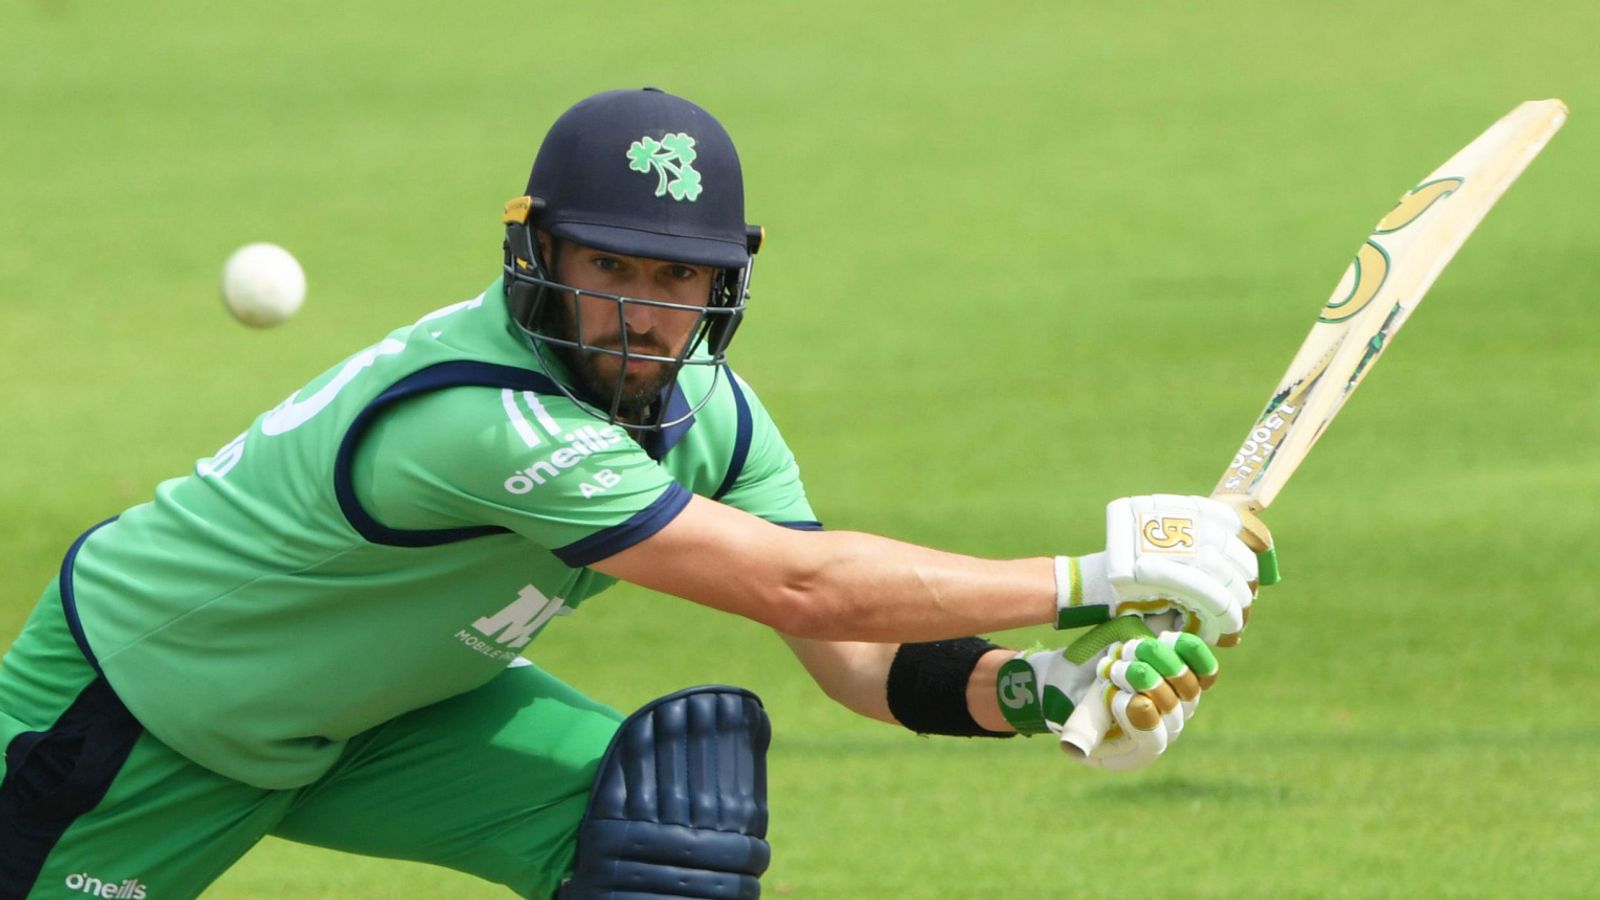 Ireland captain Andy Balbirnie wary of England ahead of first ODI despite  absence of six World Cup winners | Cricket News | Sky Sports